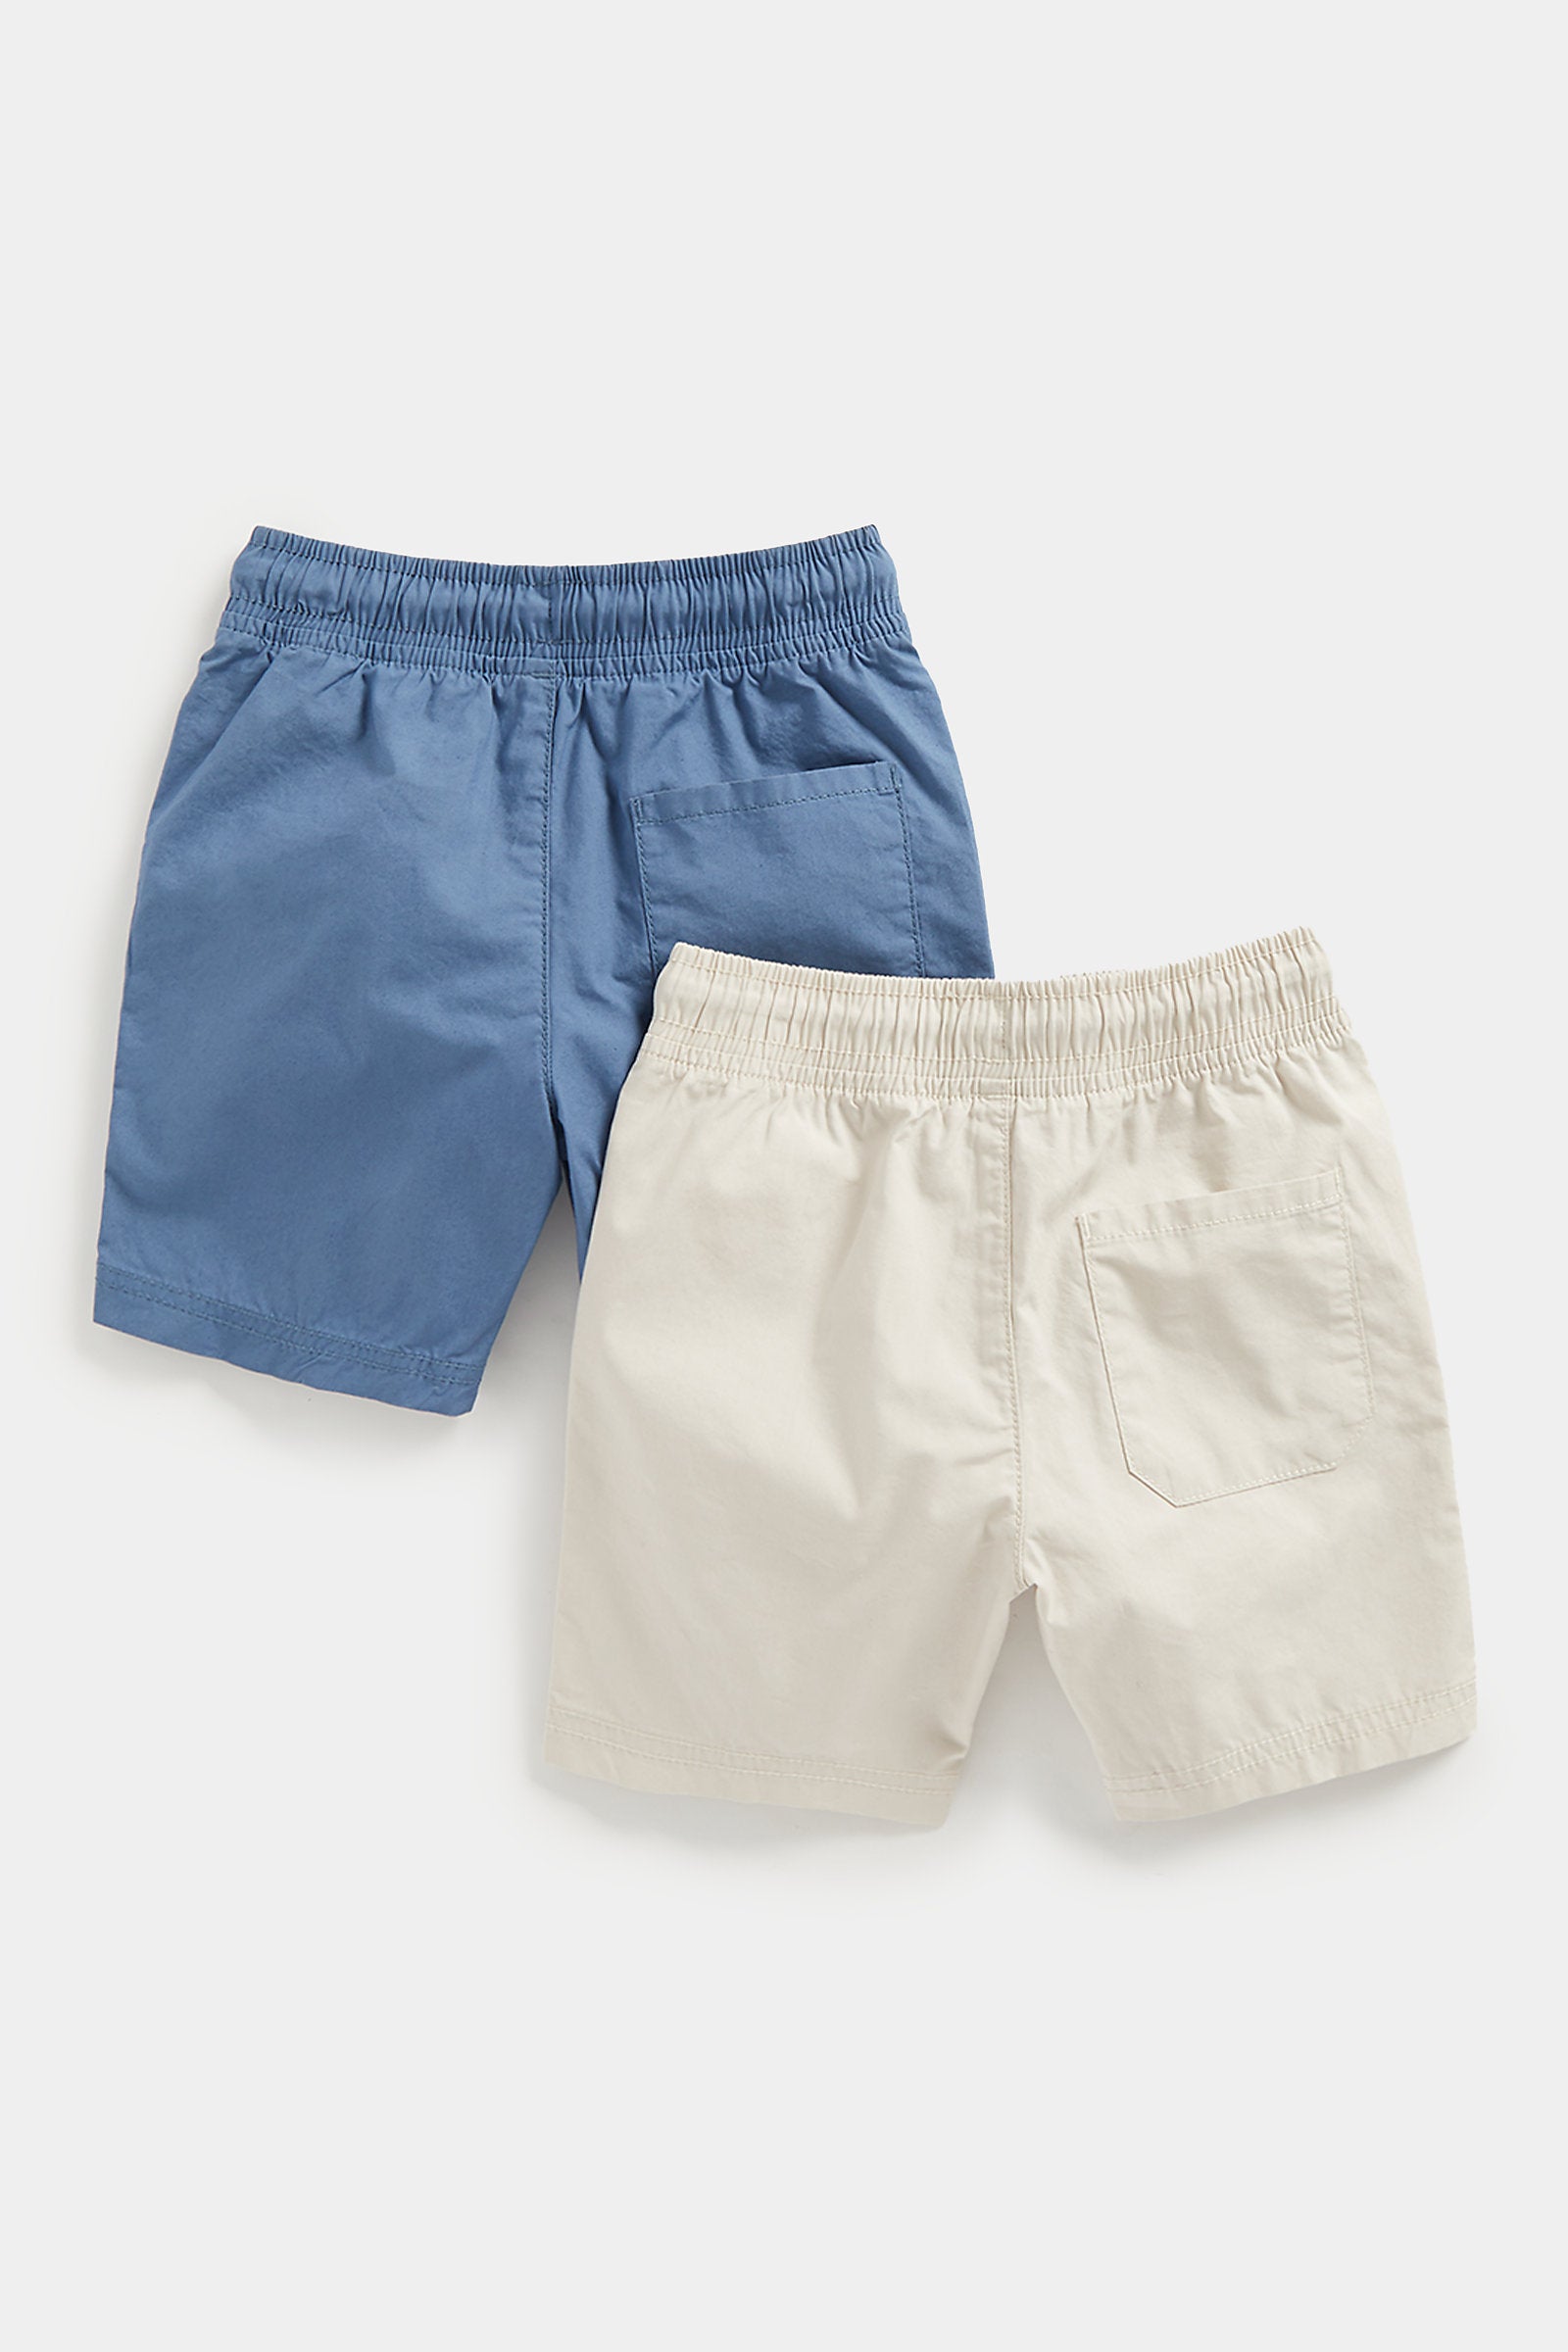 Mothercare Blue and Ecru Poplin Shorts - 2 Pack